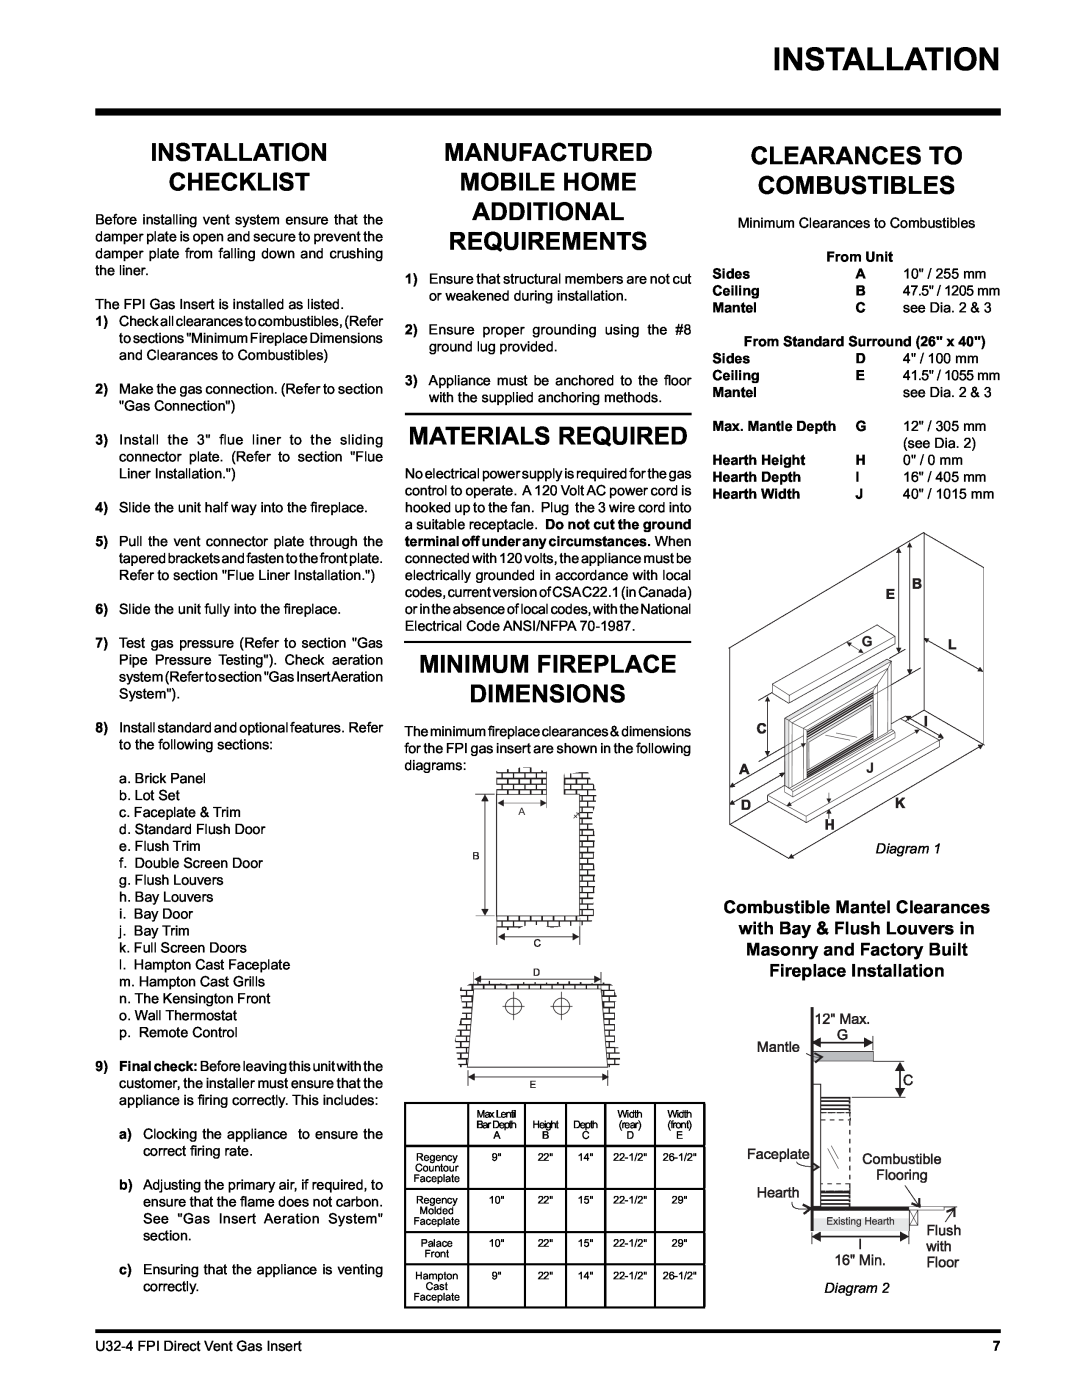 Regency U32-NG4 Installation Checklist, Manufactured Mobile Home Additional Requirements, Materials Required, Sides 